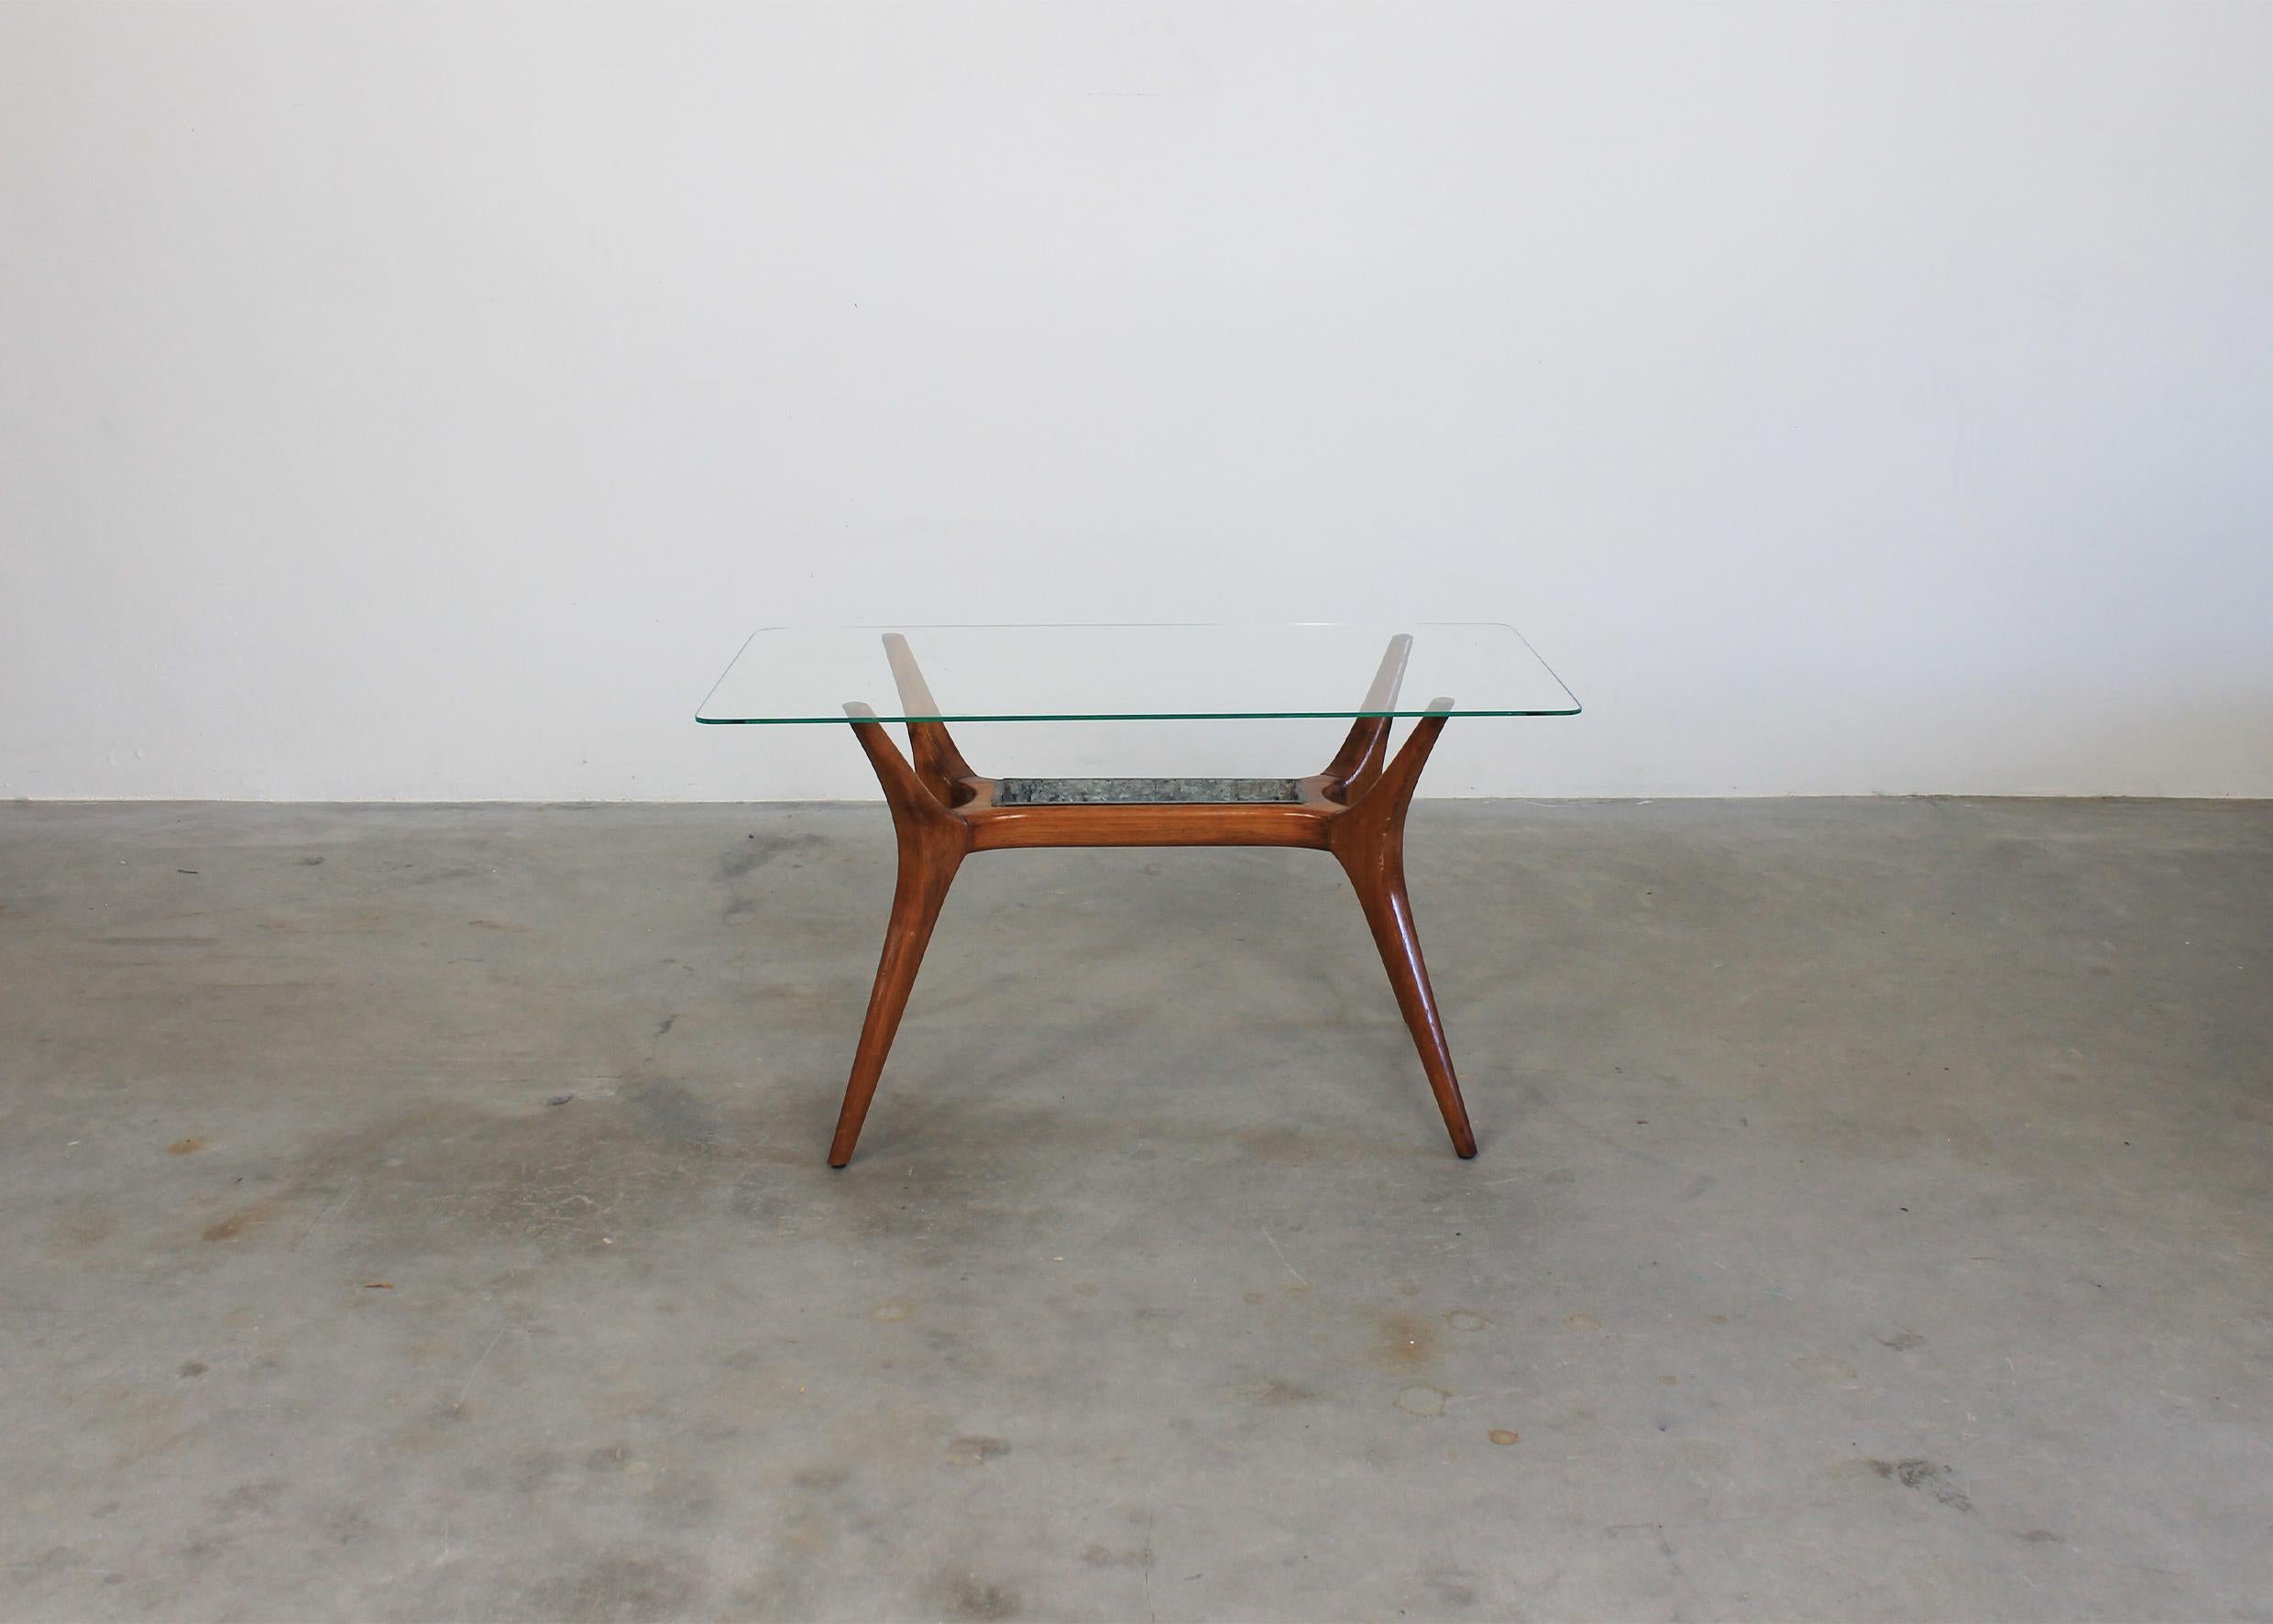 Mid-Century Modern Gio Ponti Occasional Table in Wood and Glass by Figli di Amedeo Cassina 1950s For Sale